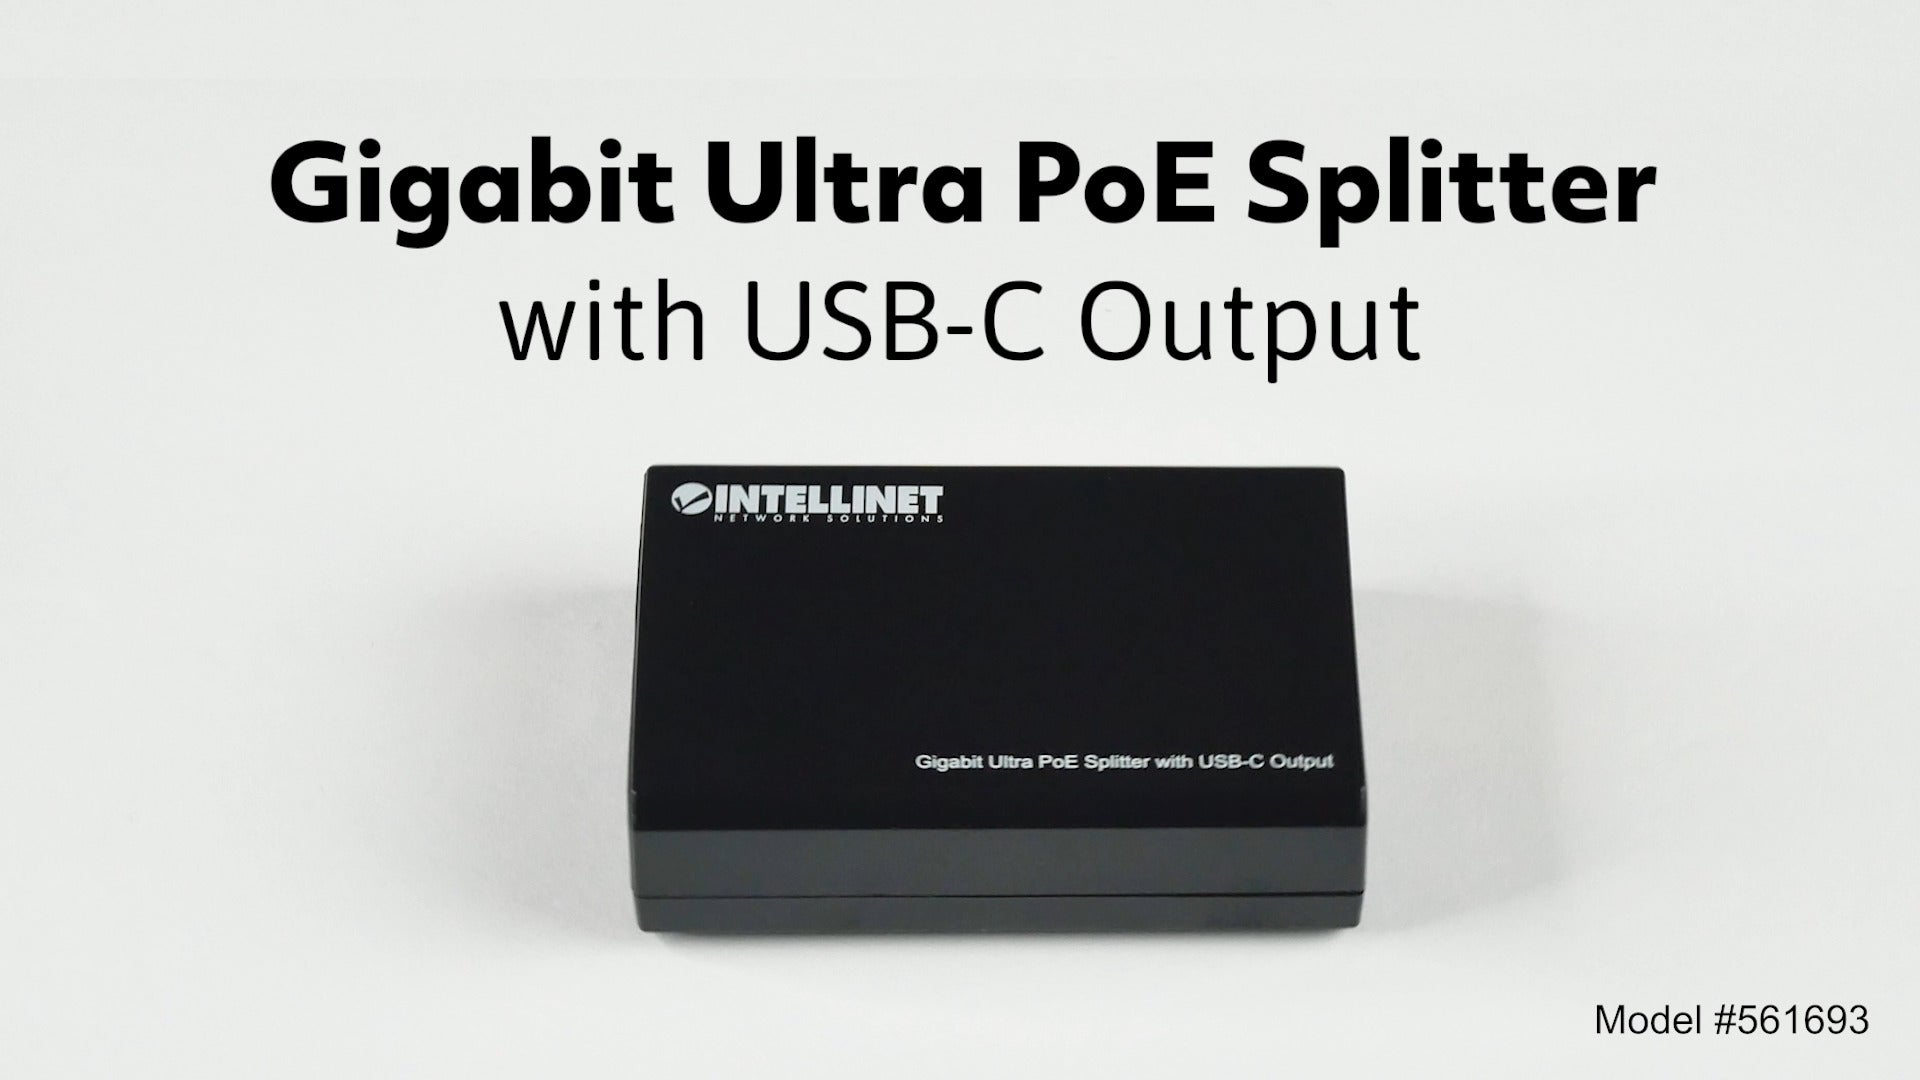 Load video: With this Gigabit Ultra PoE Splitter, you can use your existing PoE network connection to charge a USB-C powered device such as a notebook, Macbook Pro®, UltrabookTM, or tablet.This PoE++ Splitter (4PPoE) separates the Ethernet connection from the power coming through the cable and outputs them into separate ports for USB-C Power Delivery up to 45W and Gigabit Ethernet when connected via a single RJ45 network cable to an IEEE 802.3bt-compliant PoE injector or PoE switch.It provides overload, over-current, and overheat protection for maximum safety, and it is backward compatible with IEEE 802.3at and IEEE 802.3af, allowing the Ultra PoE Splitter to support any PoE connection.